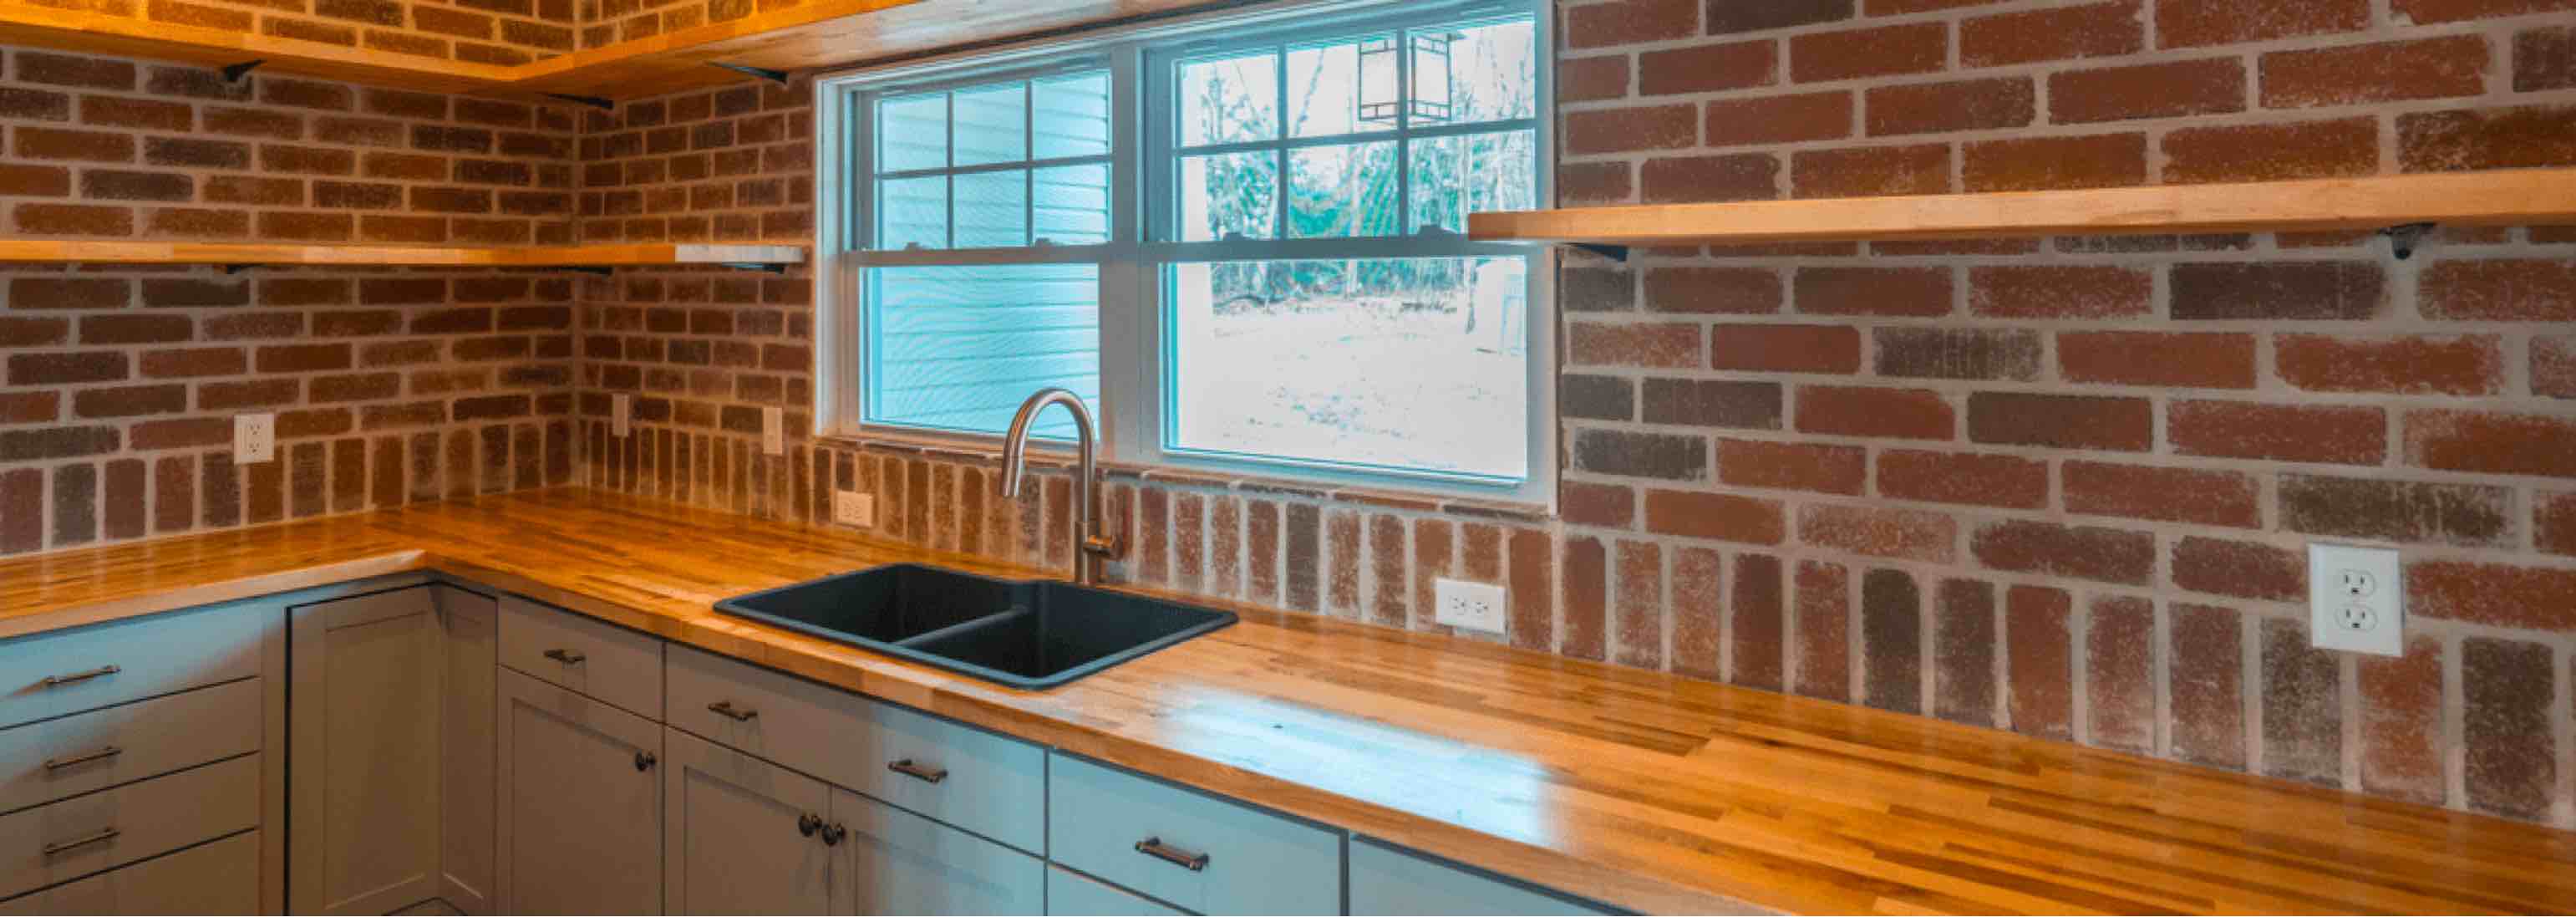 Mother in law kitchen with brick interior